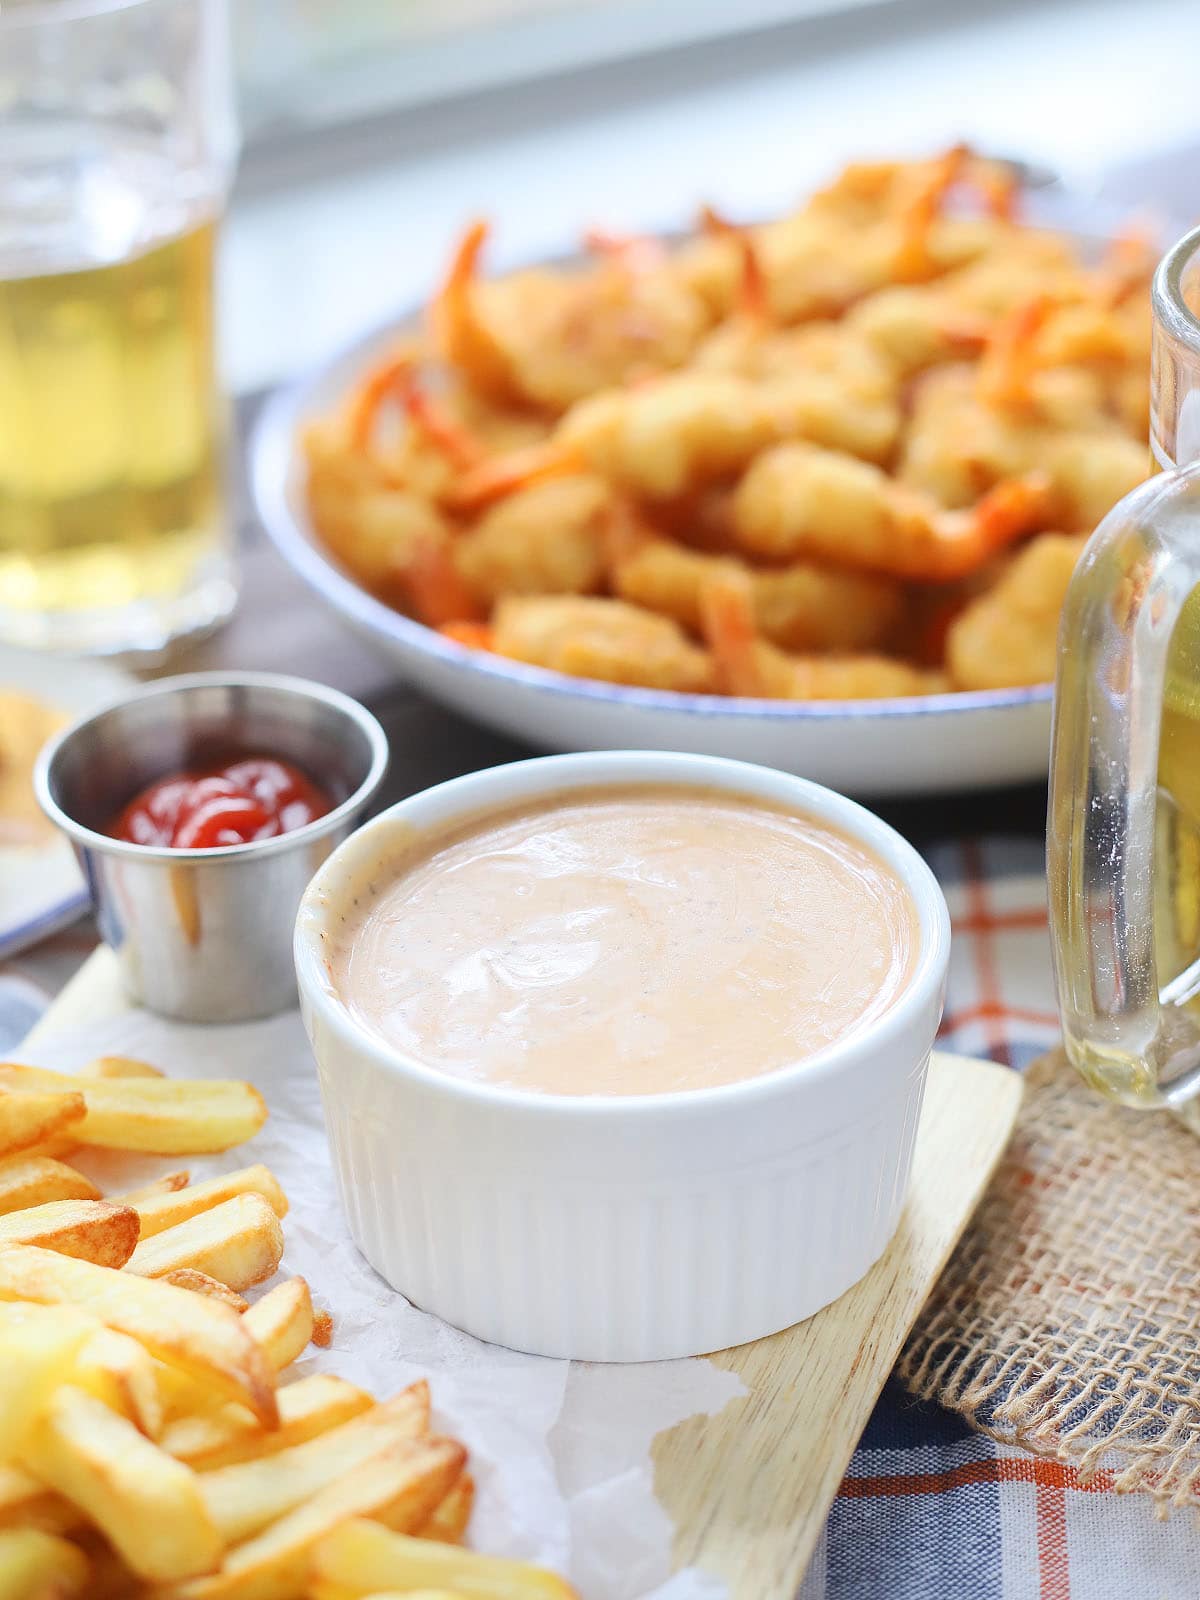 White condiment bowl of Mississippi comeback sauce with French fries and a platter of fried shrimp in the background.